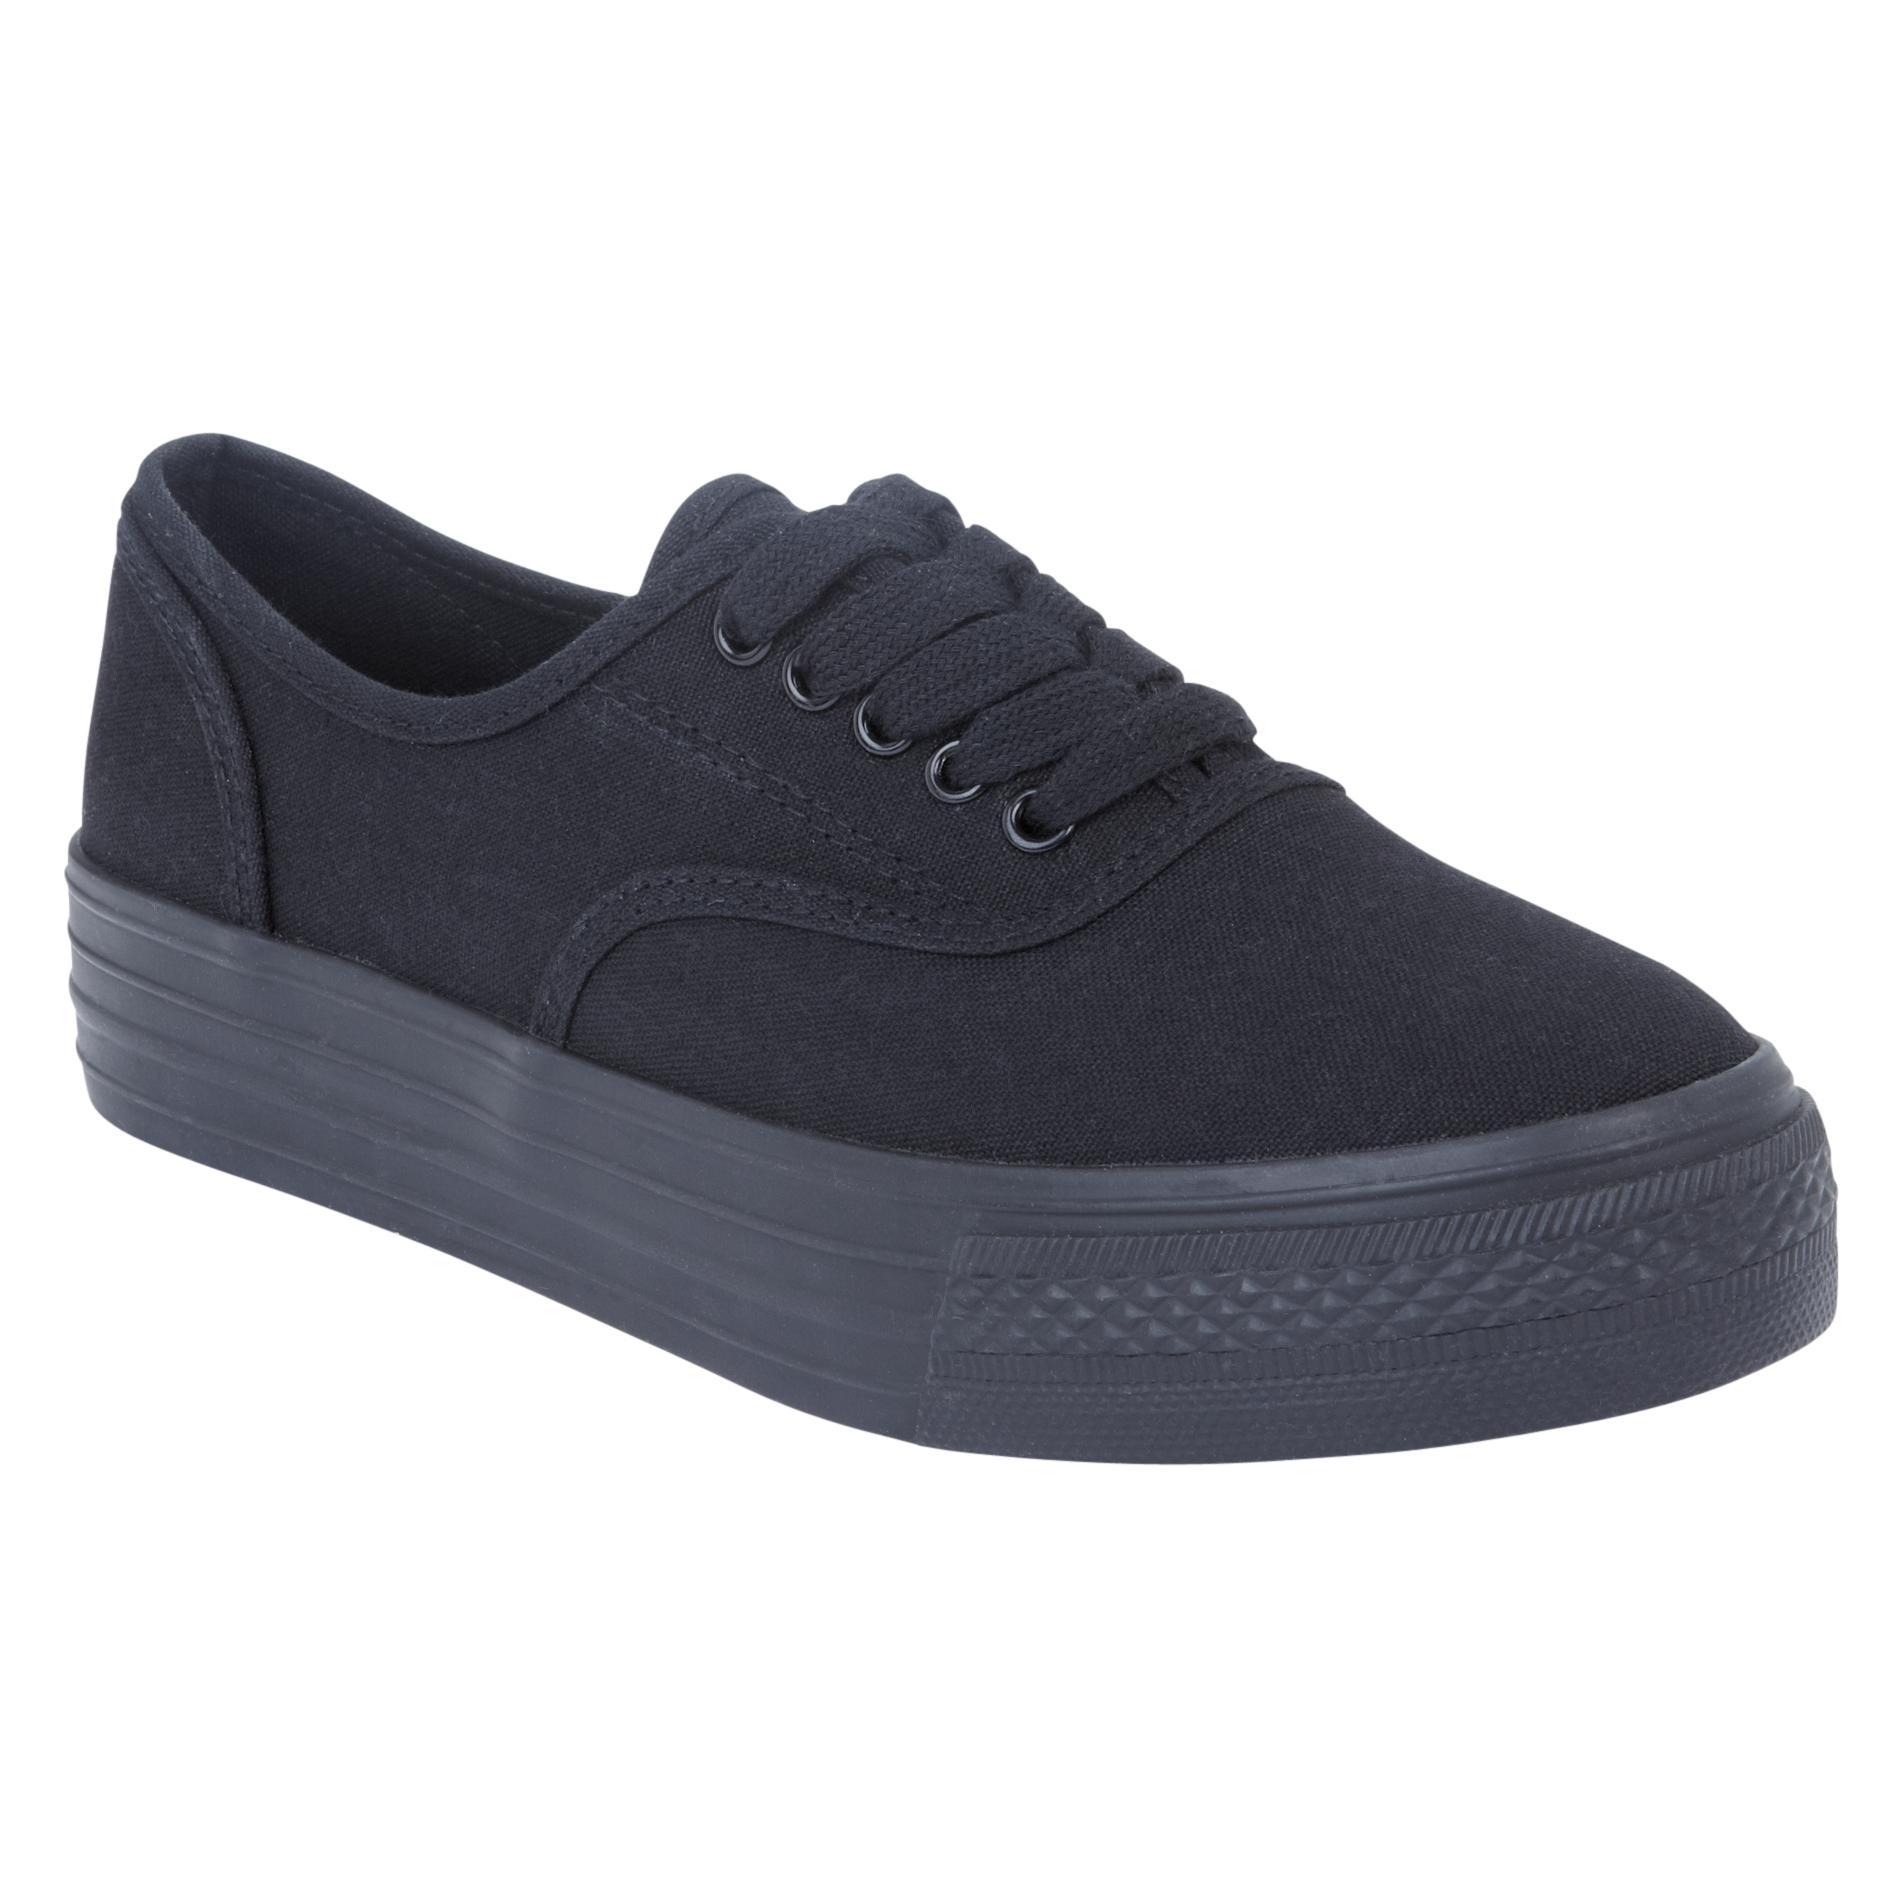 Bongo Women's High Wall Canvas Shoe Difference- Black